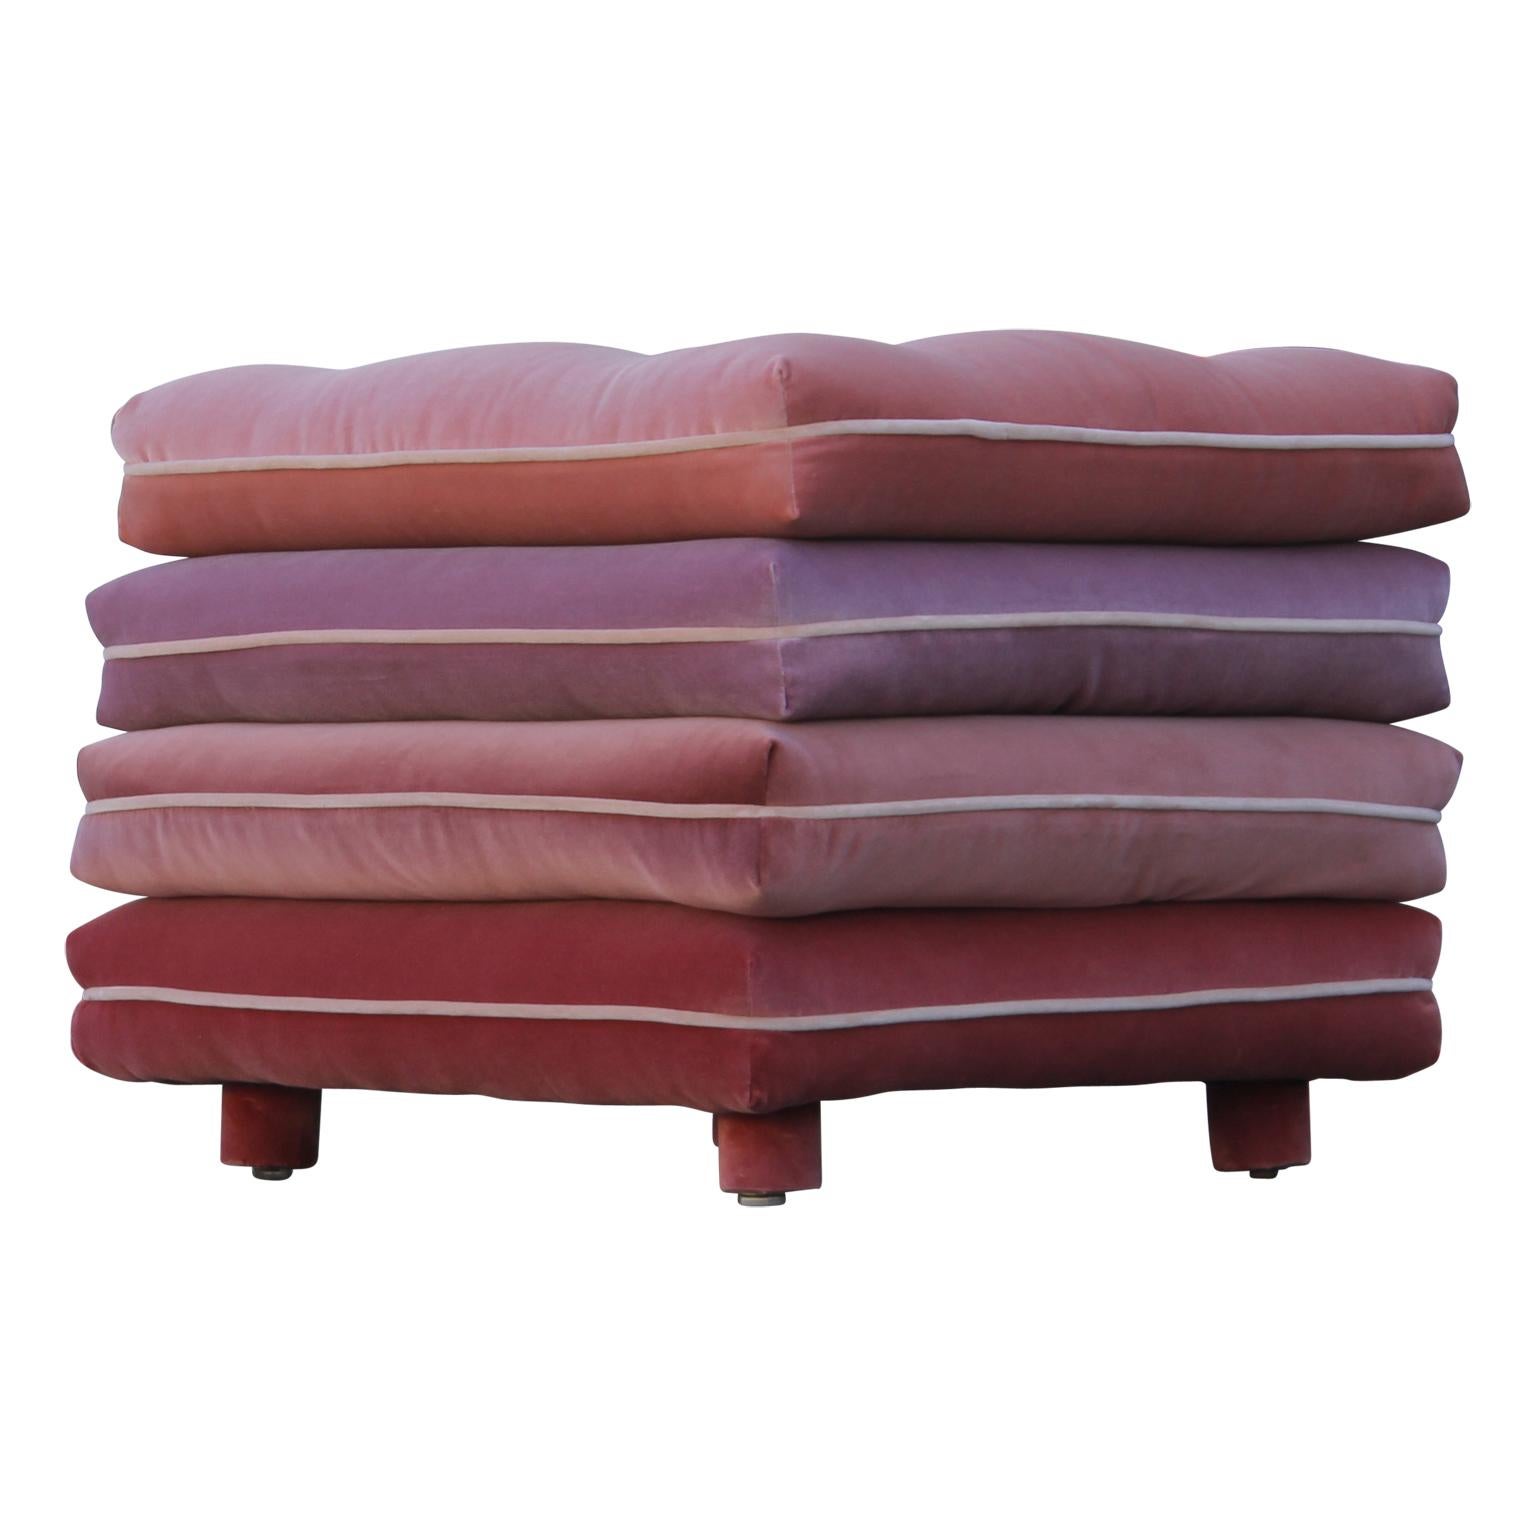 Modern Pair of Custom Pink Ombre / Gradient Stacked Cushion Stools on Brass Casters